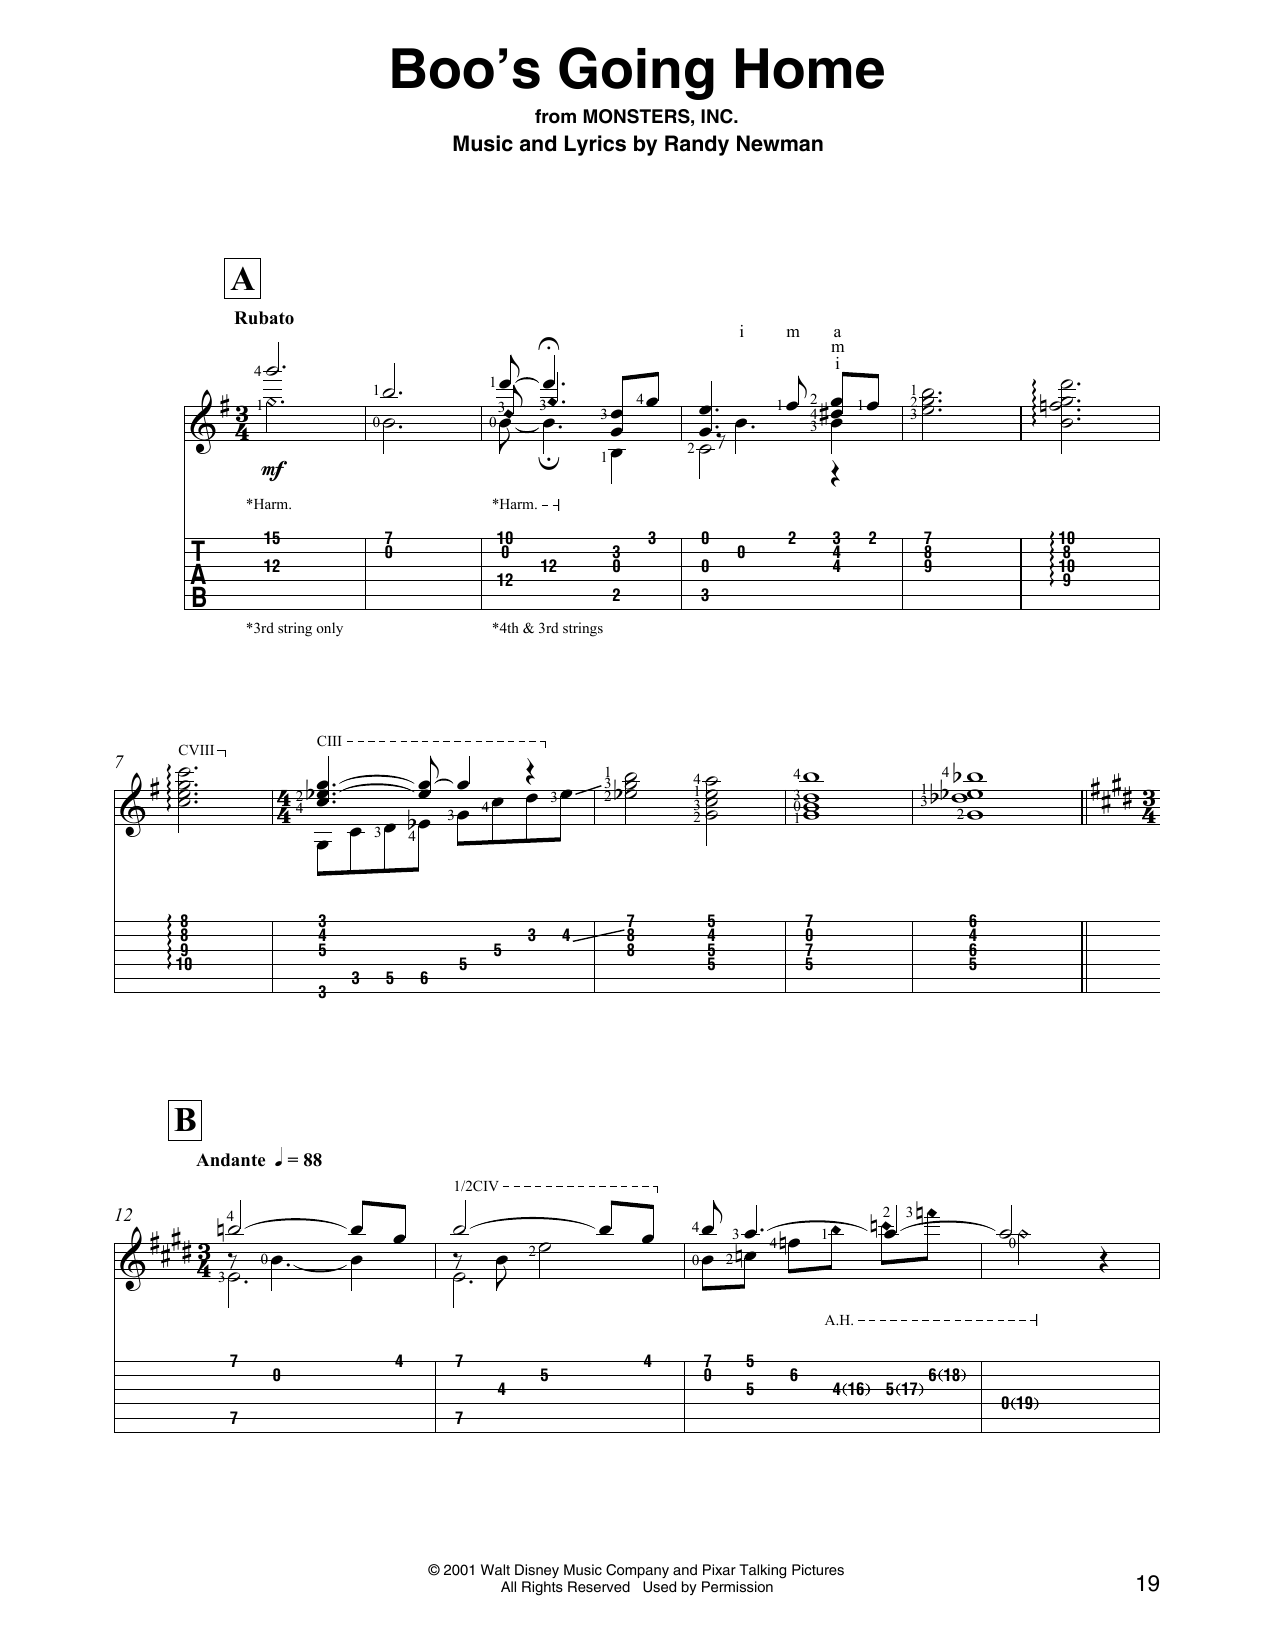 Randy Newman Boo's Going Home (from Monsters, Inc.) sheet music notes printable PDF score